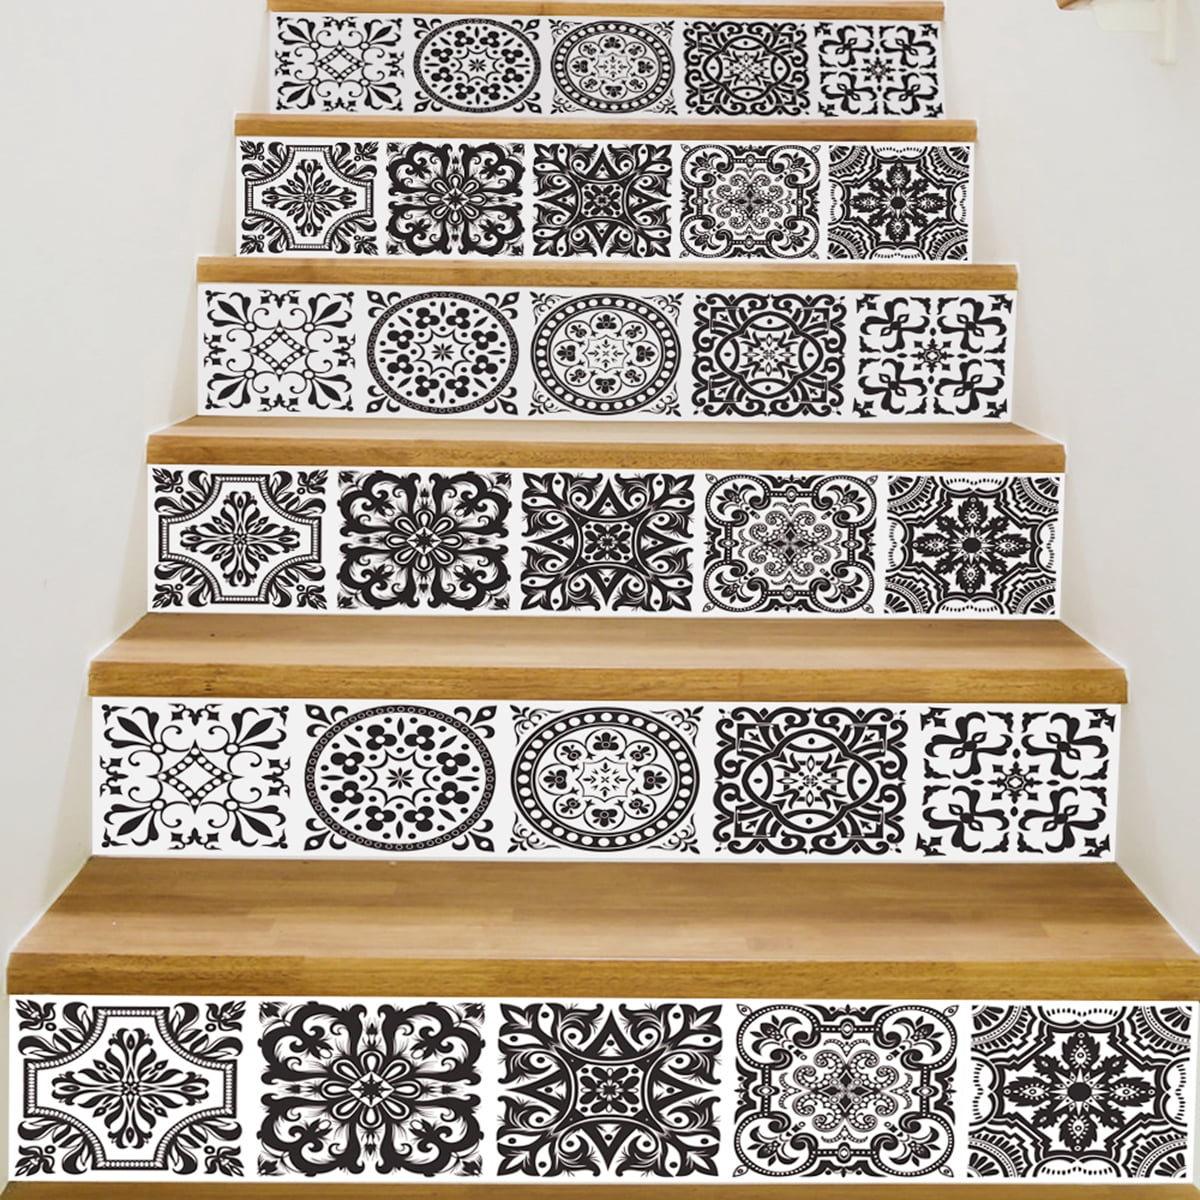 Removable Tile Decals Stickers Vinyl Stair Decals for Tiles Stair Decal Stickers Decorative Tile Stickers 7x 39x6PCS Self-Adhesive Kitchen Tile Stickers Tile Decals for Bathroom Stair Sticker